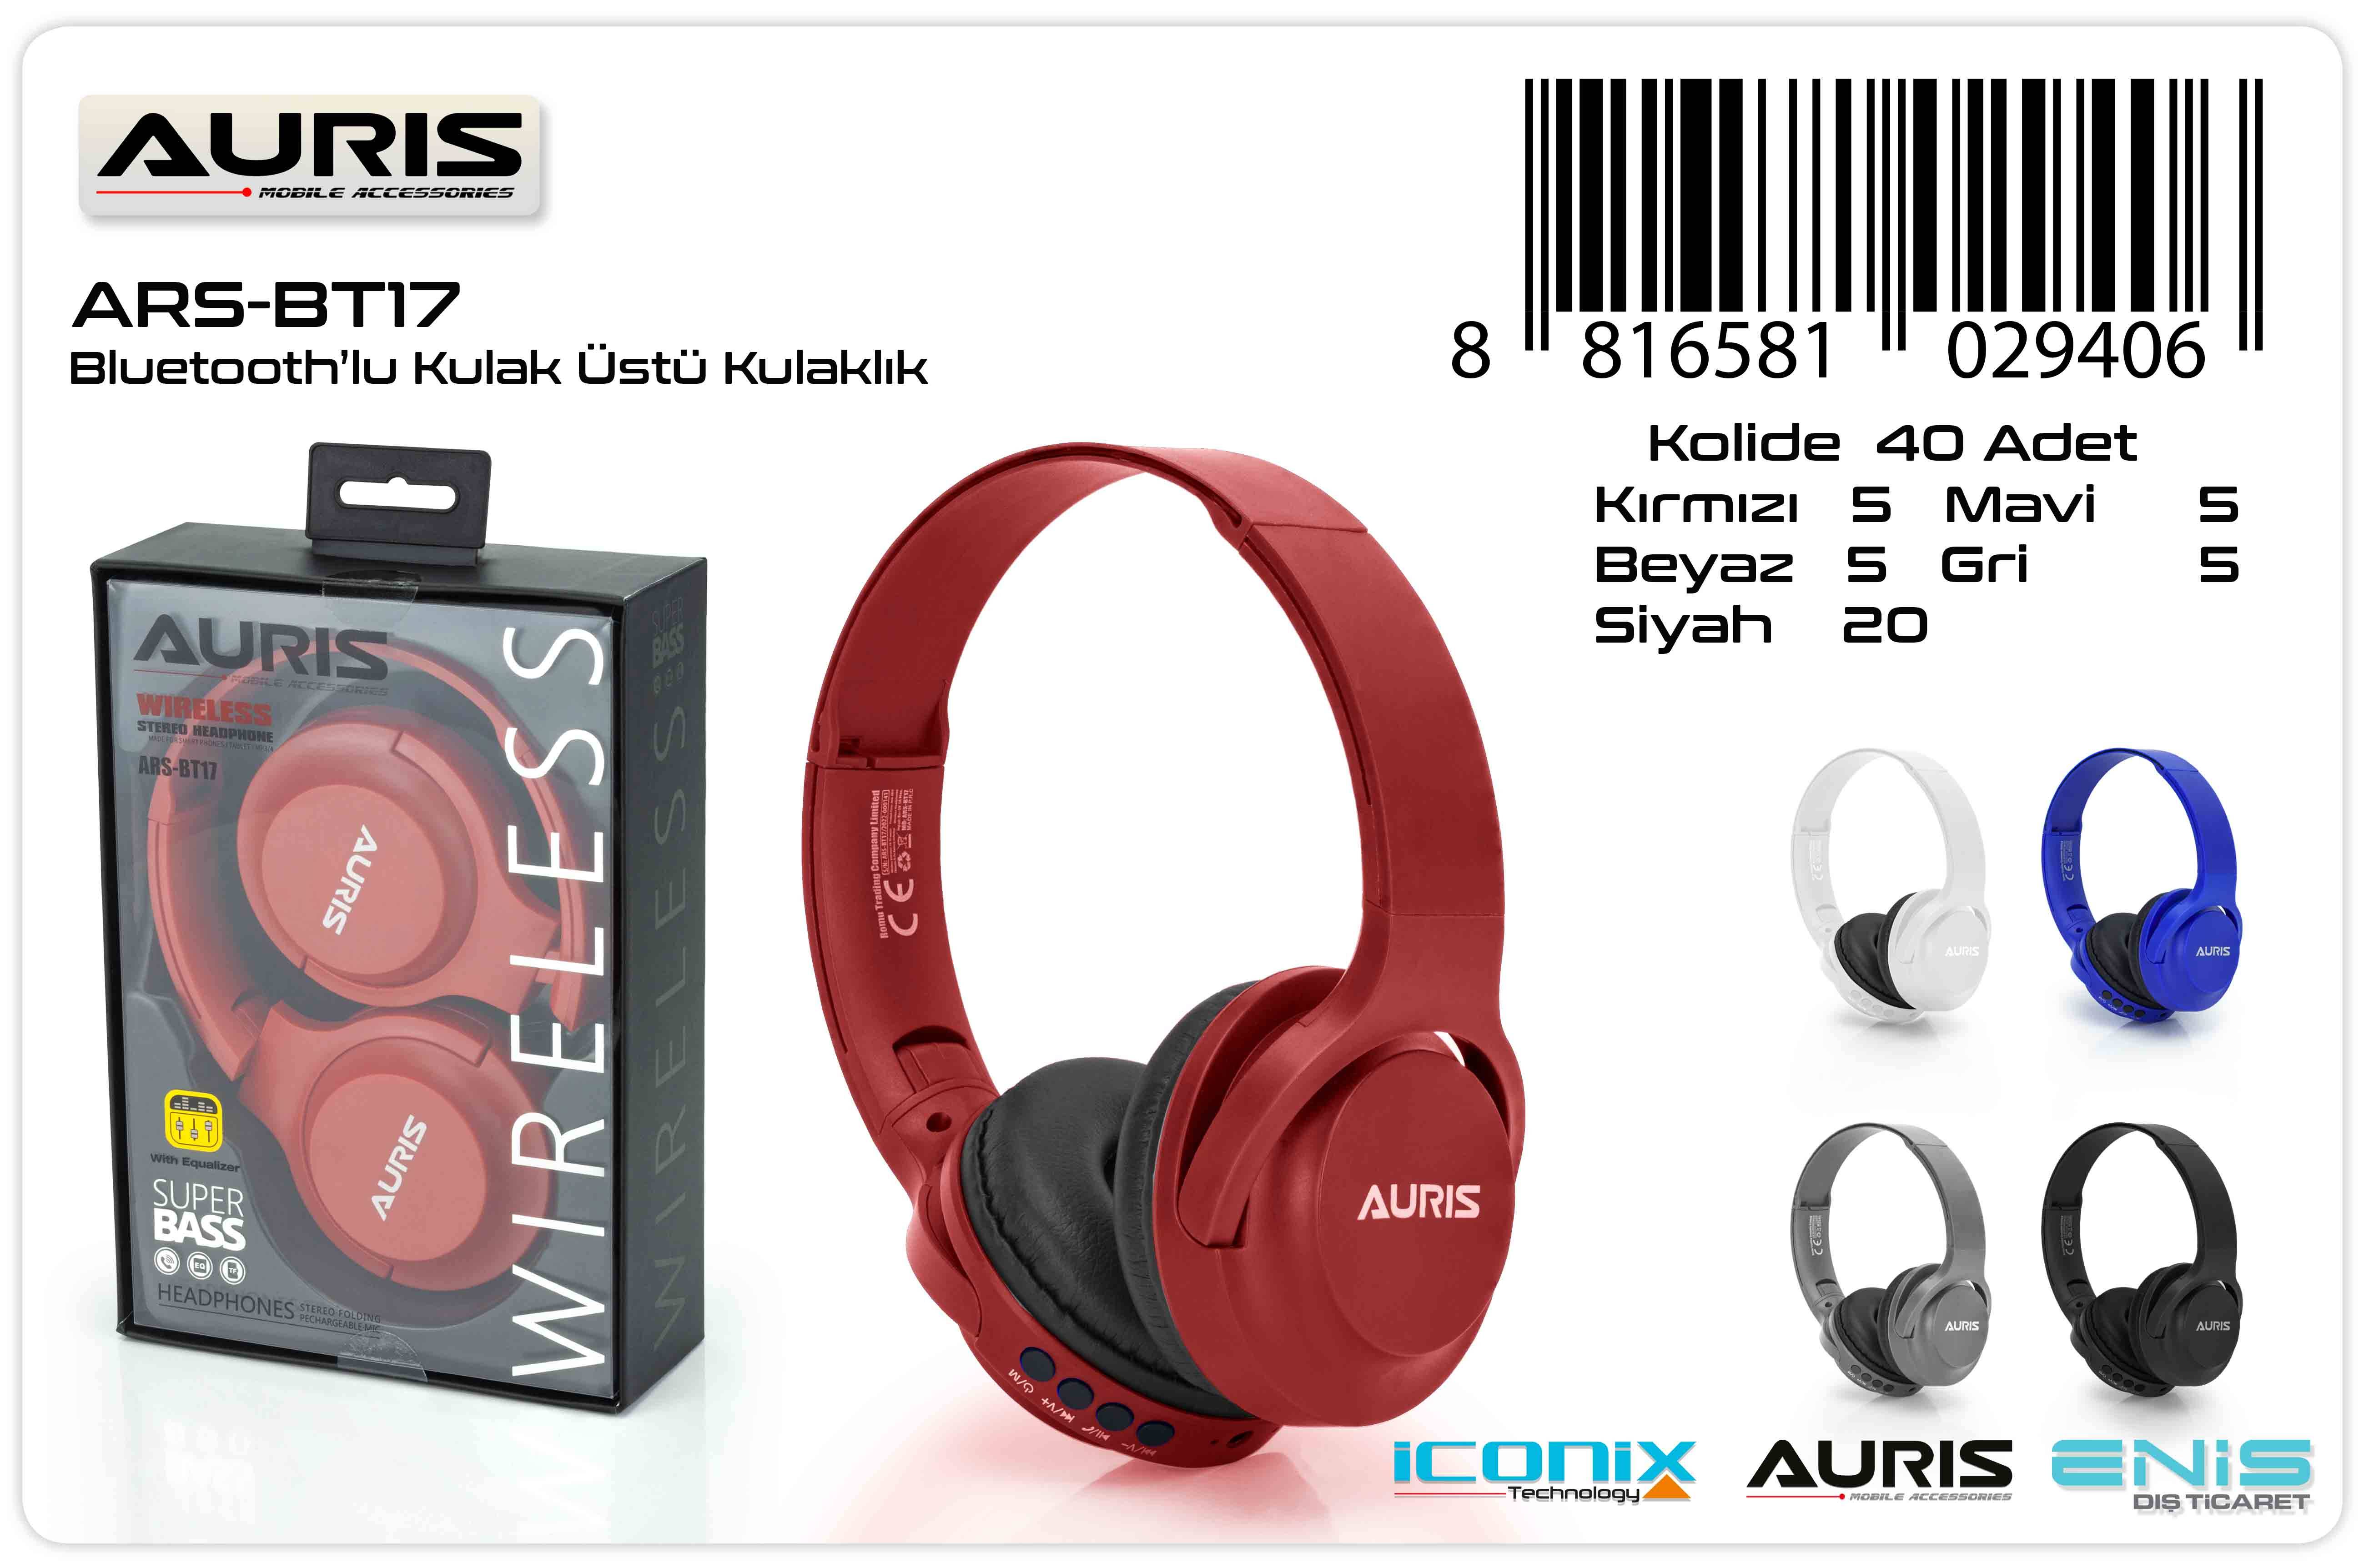 RED ARS-BT17 HEADPHONES WITH BLUETOOTH